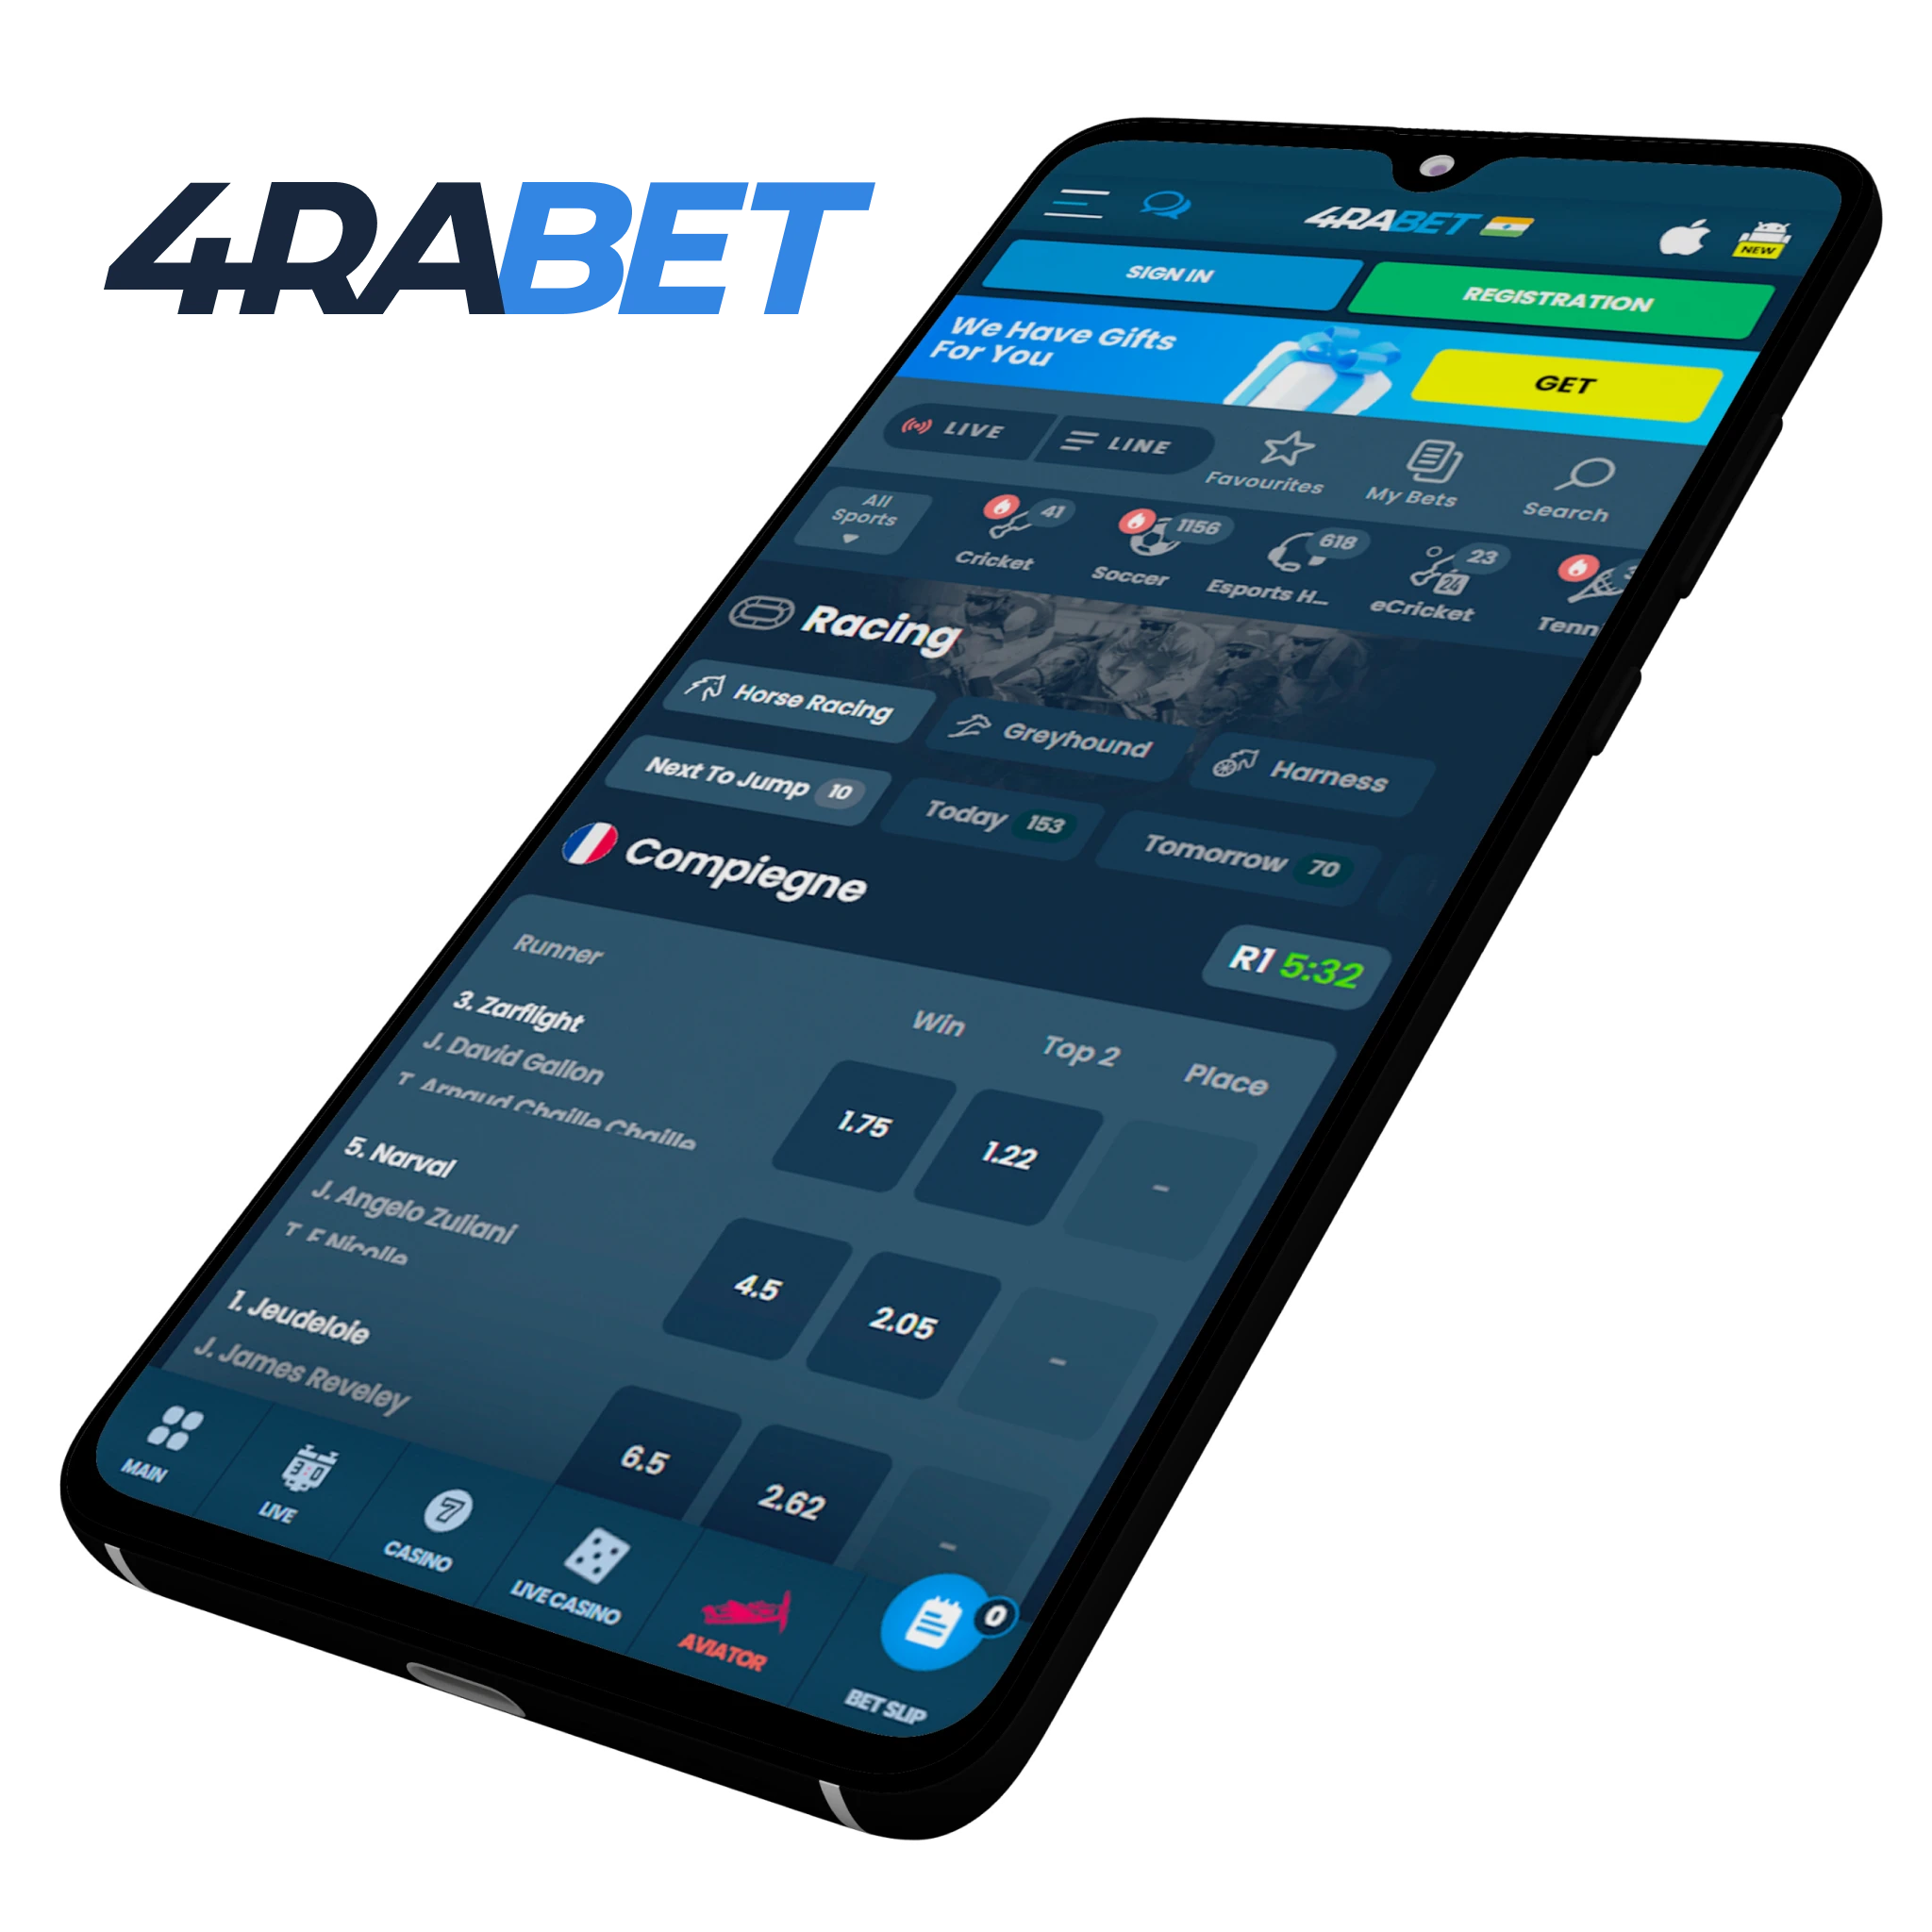 4rabet app offers a reliable and feature-rich platform for horse racing betting.